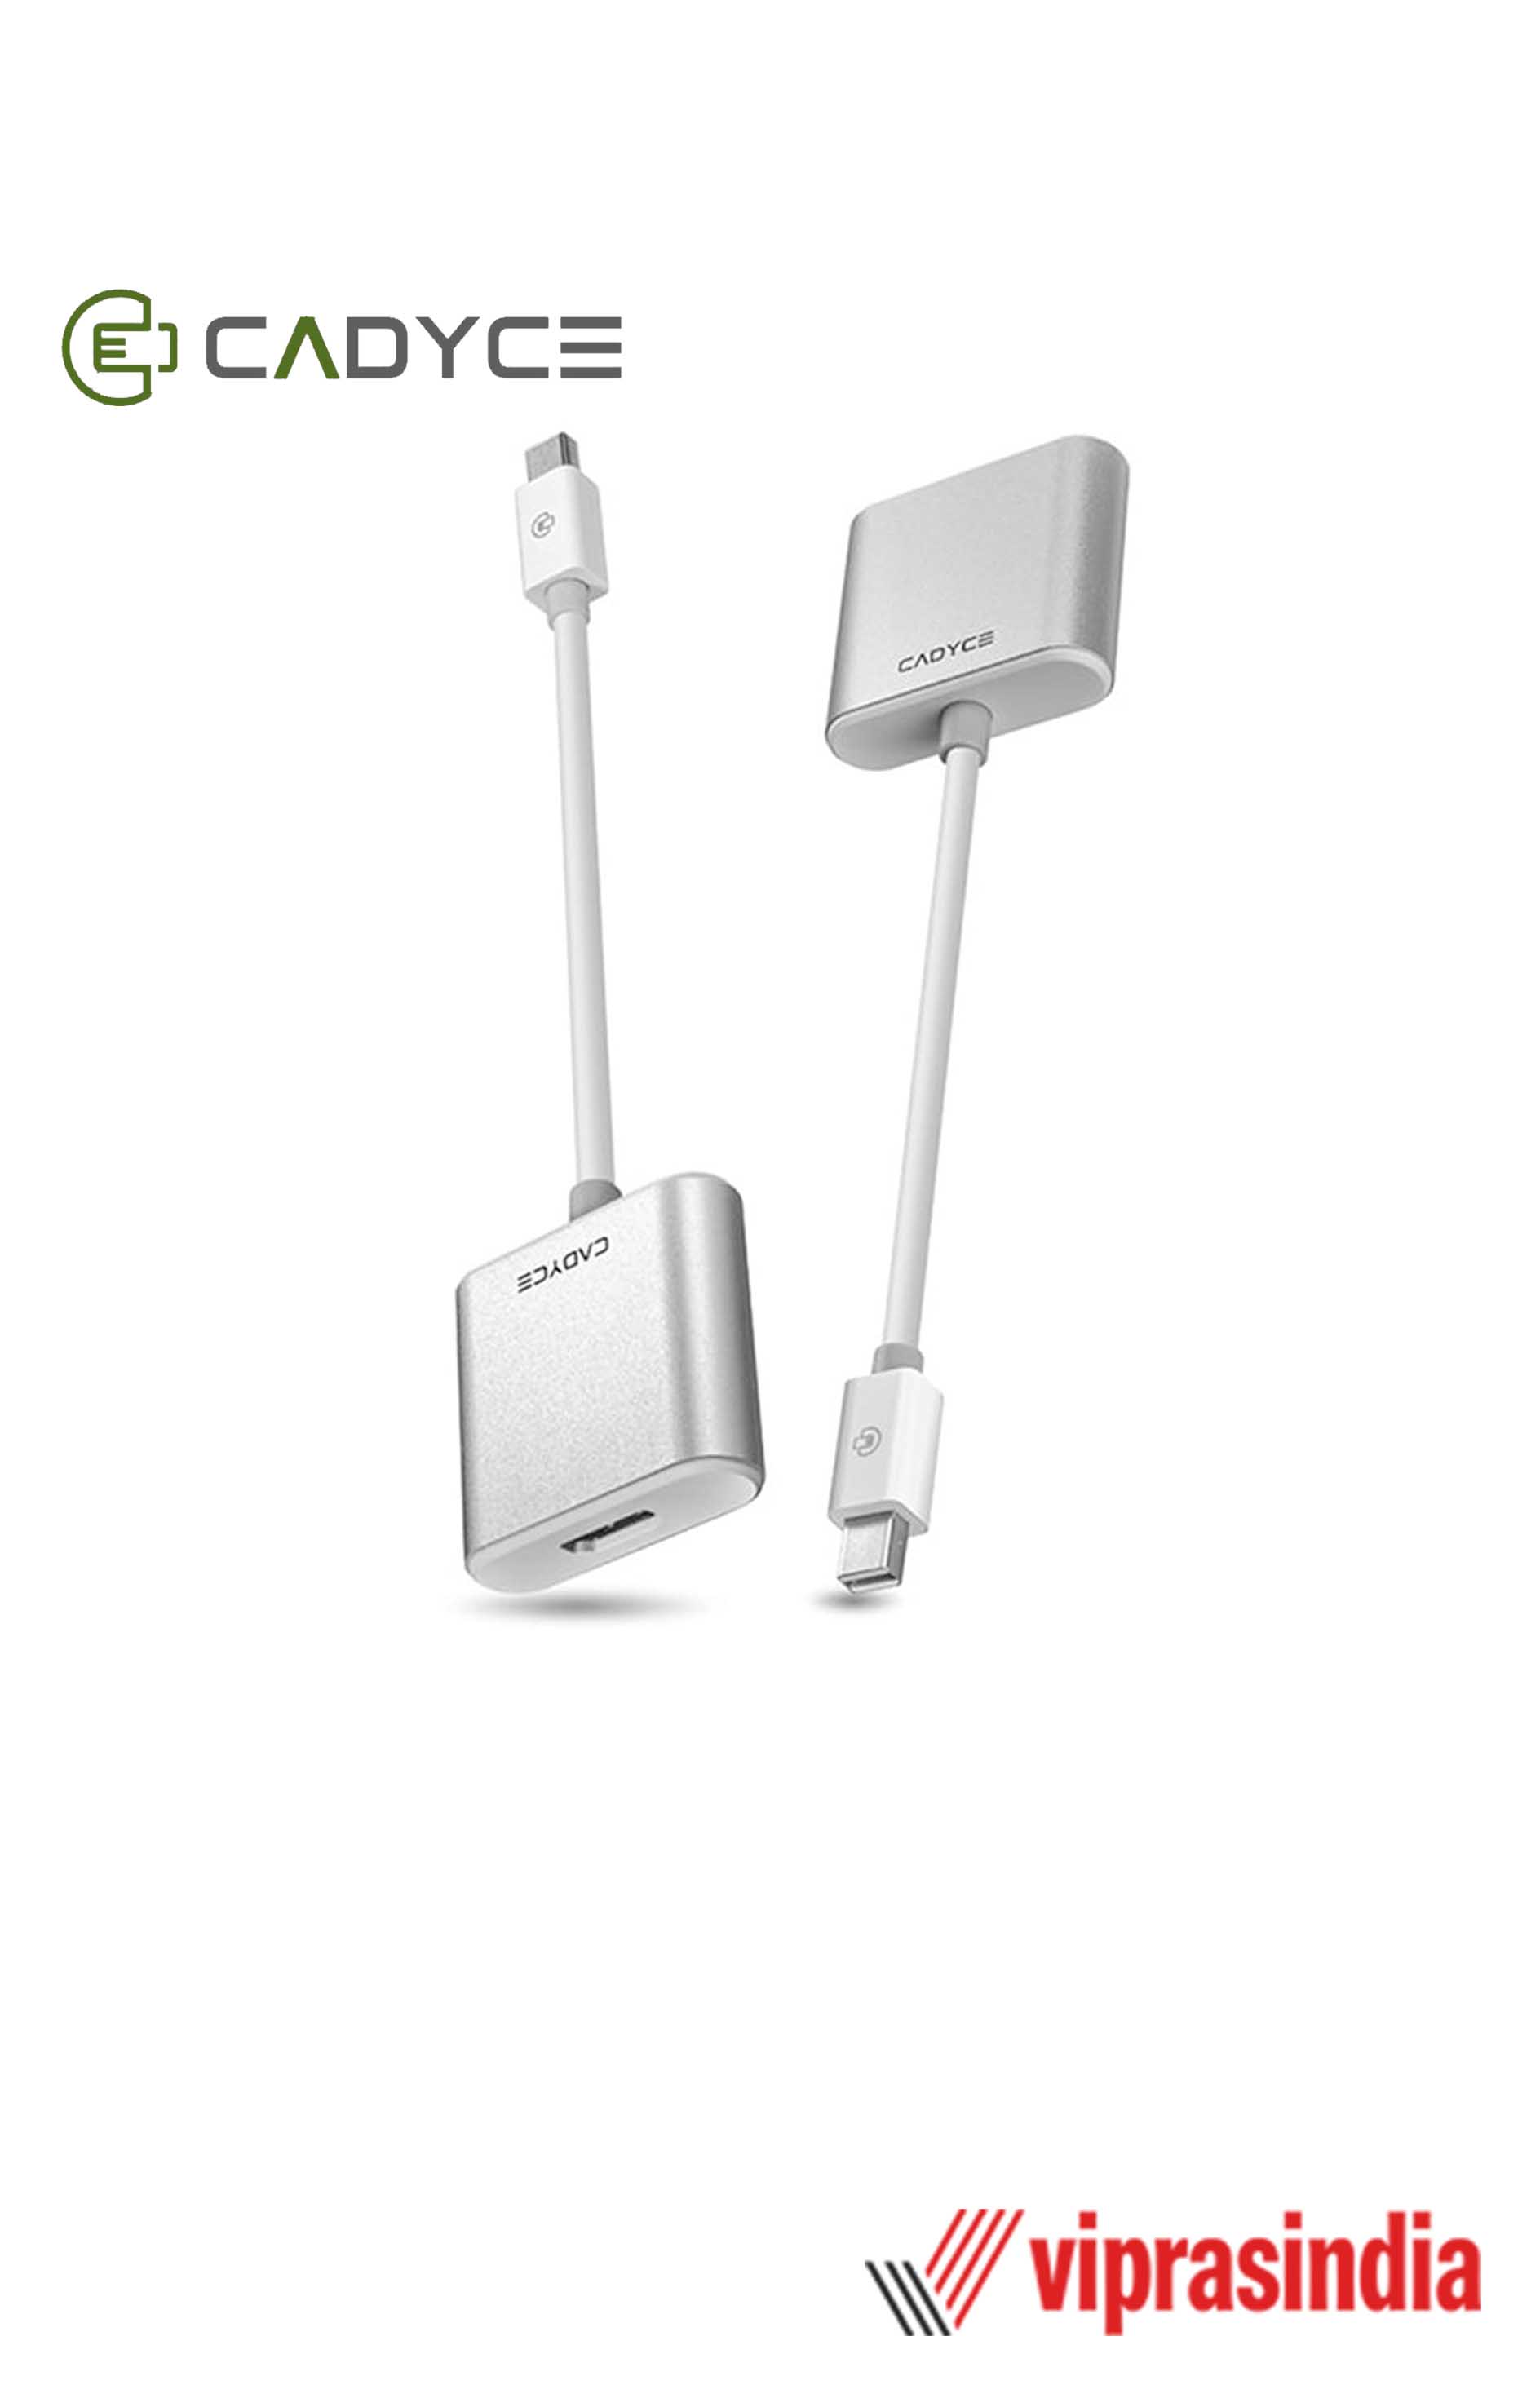 Cadyce Mini DisplayPort to HDMI Adapter with audio support CA-MDHDMI